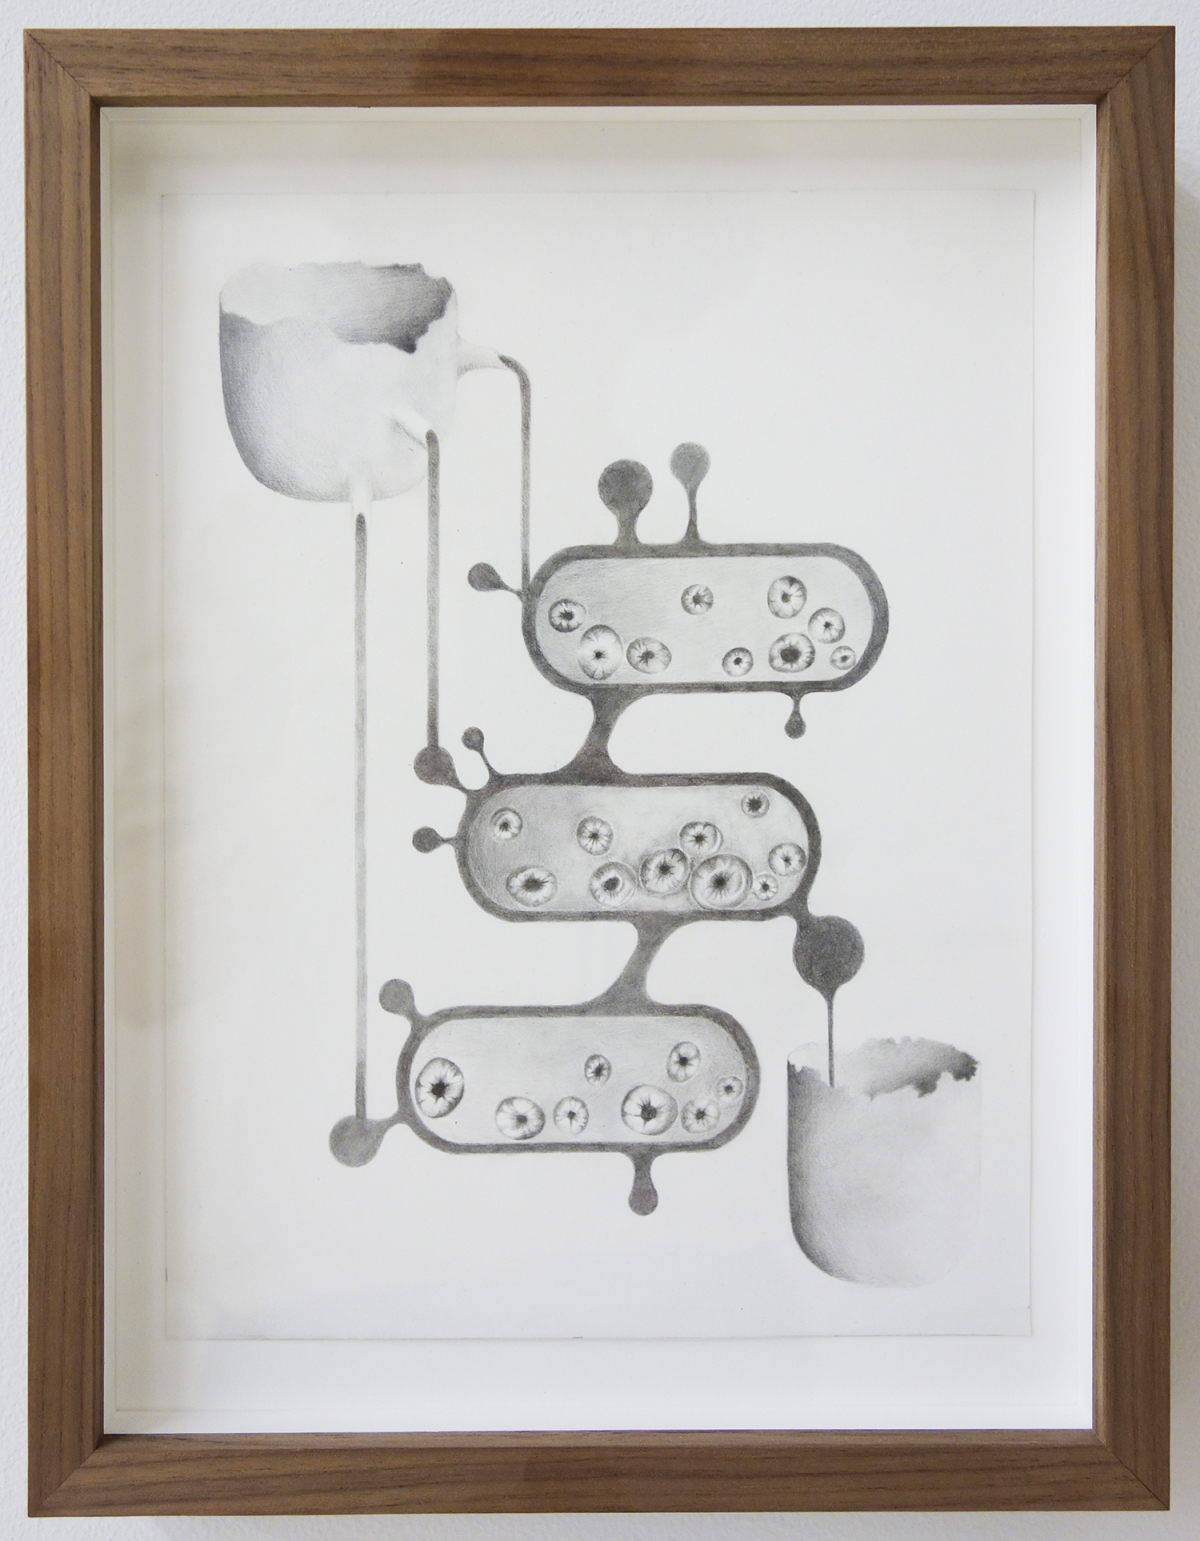 small graphite drawing framed in brown wood. the drawing is surreal and shows an egg-shell like vessel at top left, with spouts pouring out its right side into three modular cell-like forms - the middle one drains into another cup at the bottom right.